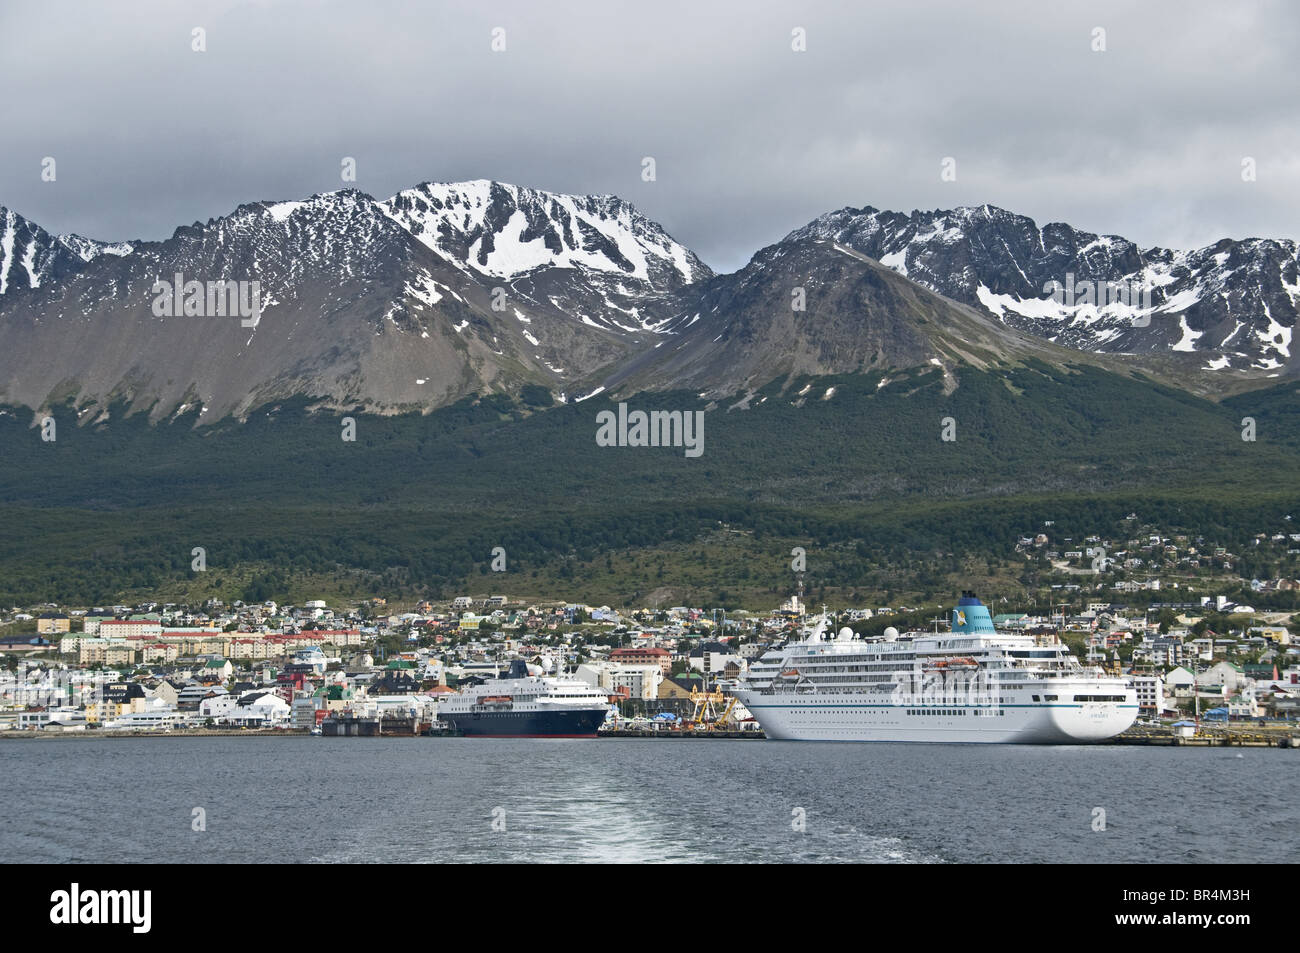 View of Ushuaia with harbor and cruise ships, Tierra del Fuego, Argentina Stock Photo